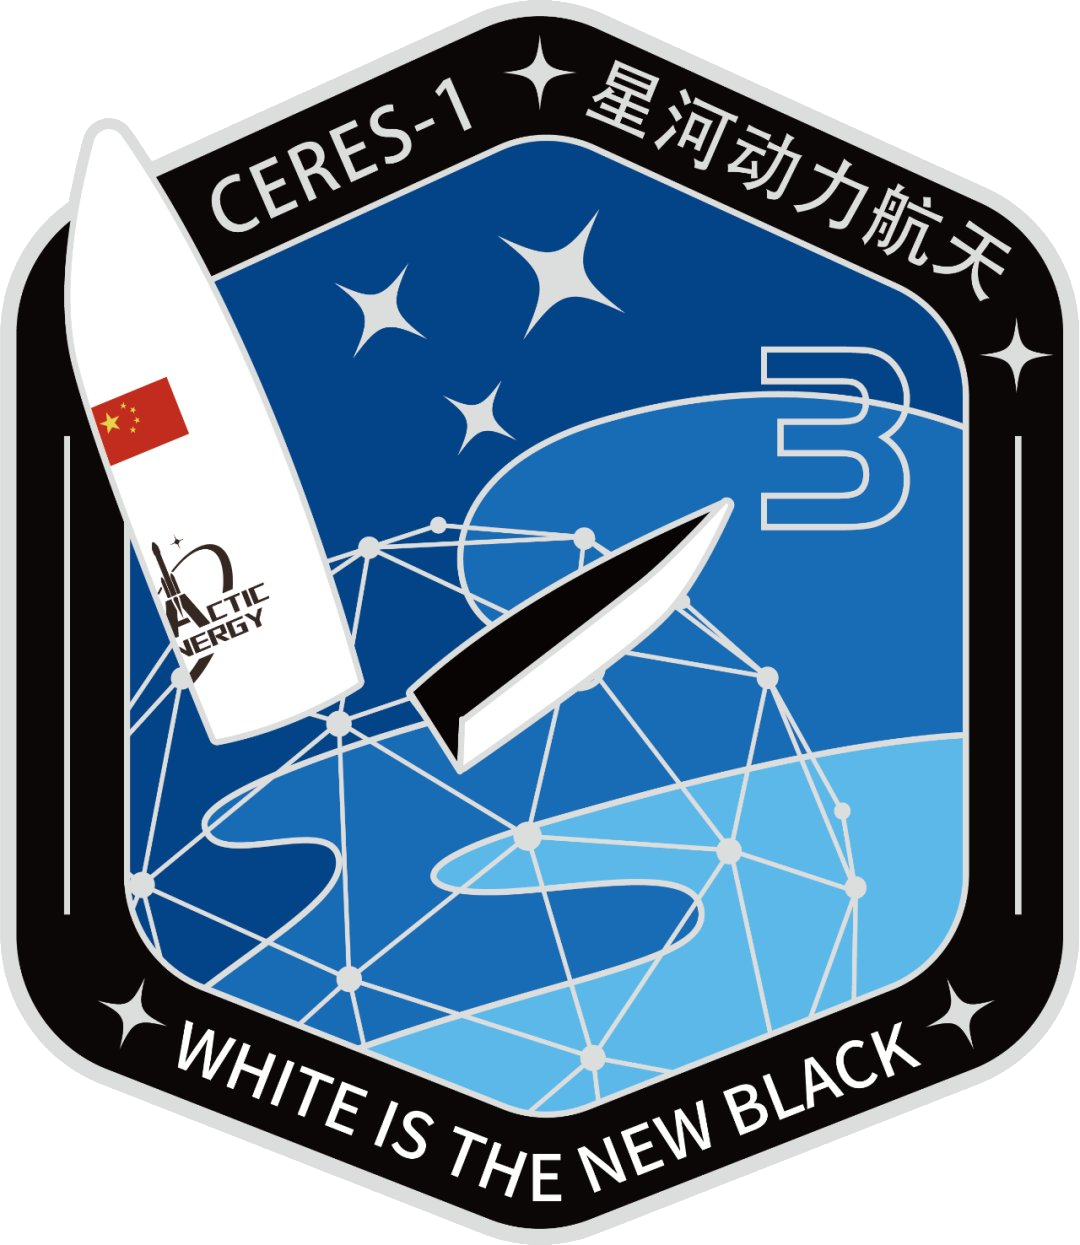 Mission patch for Taijing-1-01 & 02